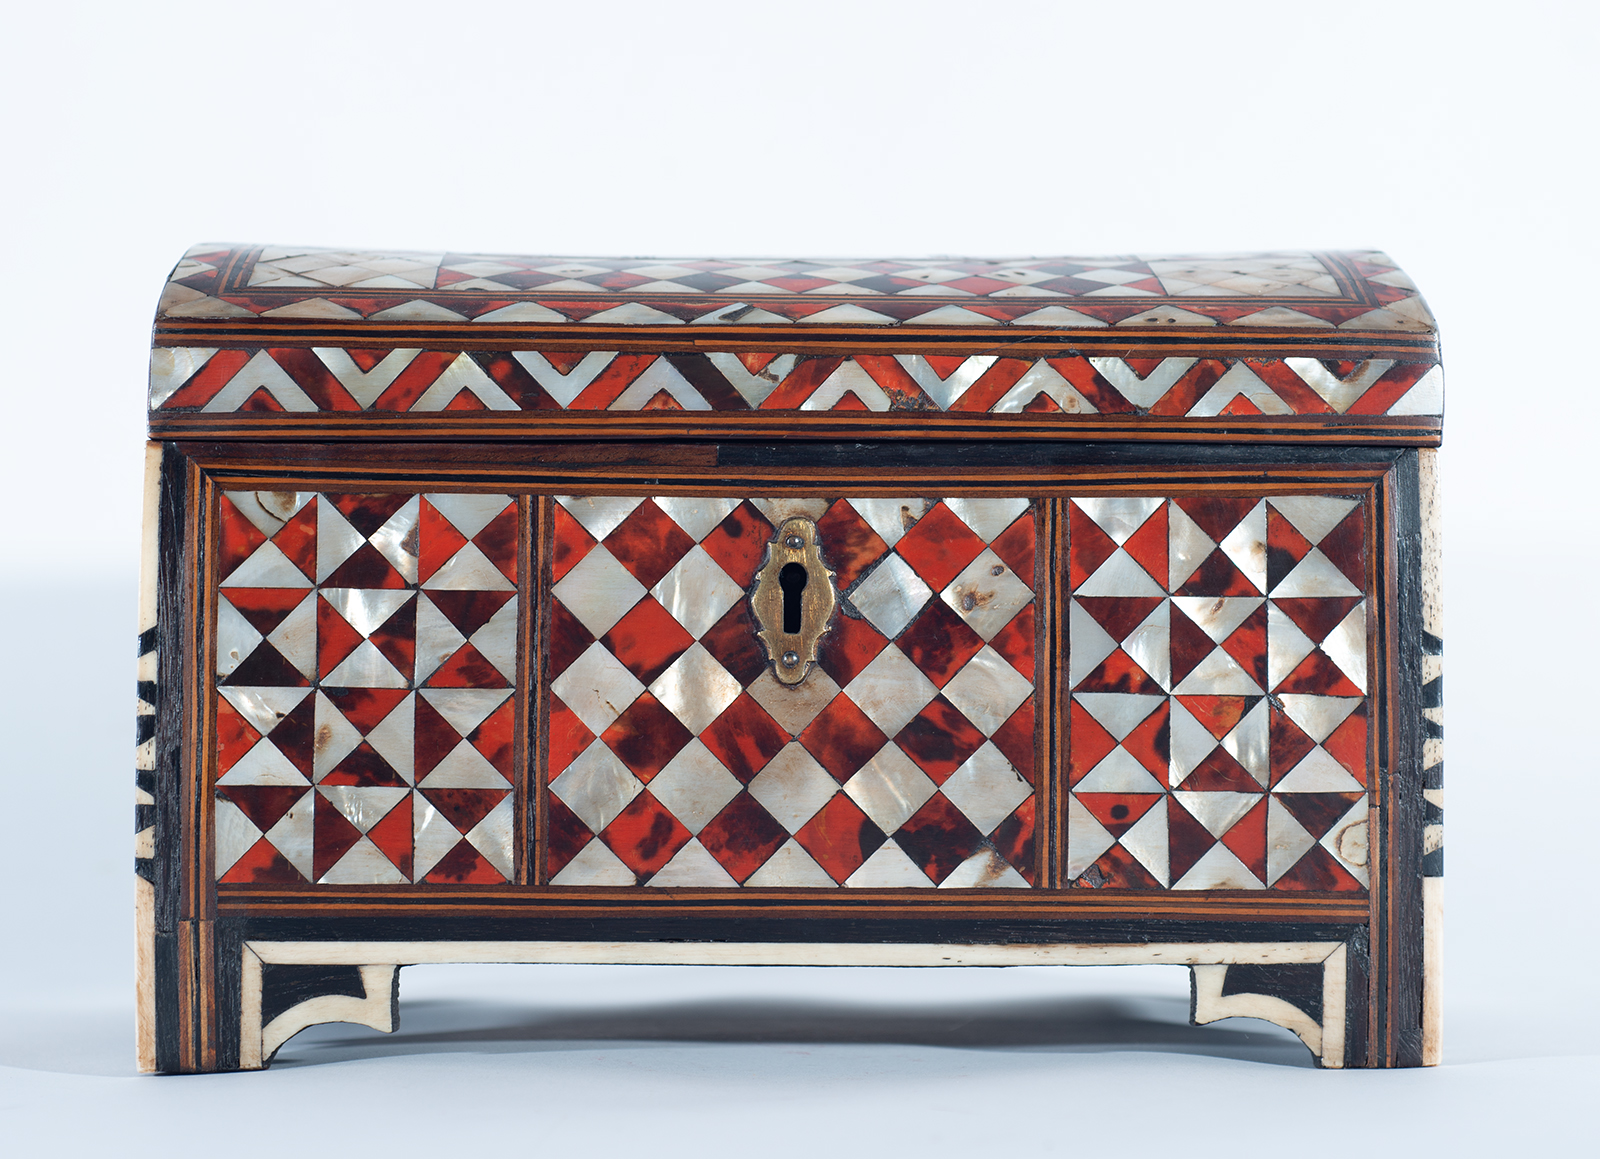 Important Ottoman chest in ebony, rosewood, mother-of-pearl and tortoiseshell, Turkey, 18th century